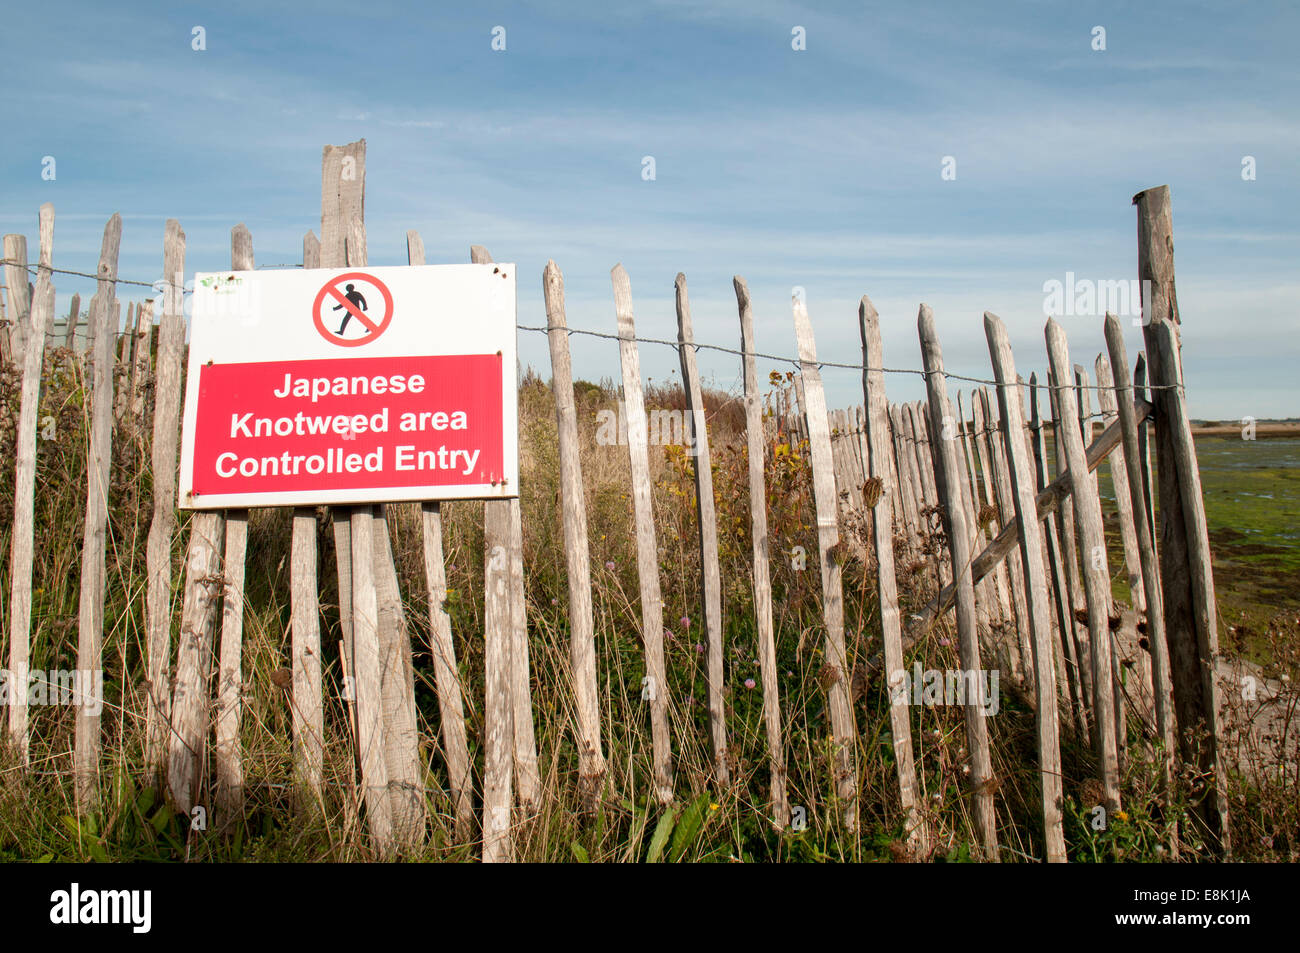 Japanese knotweed restricted area Stock Photo